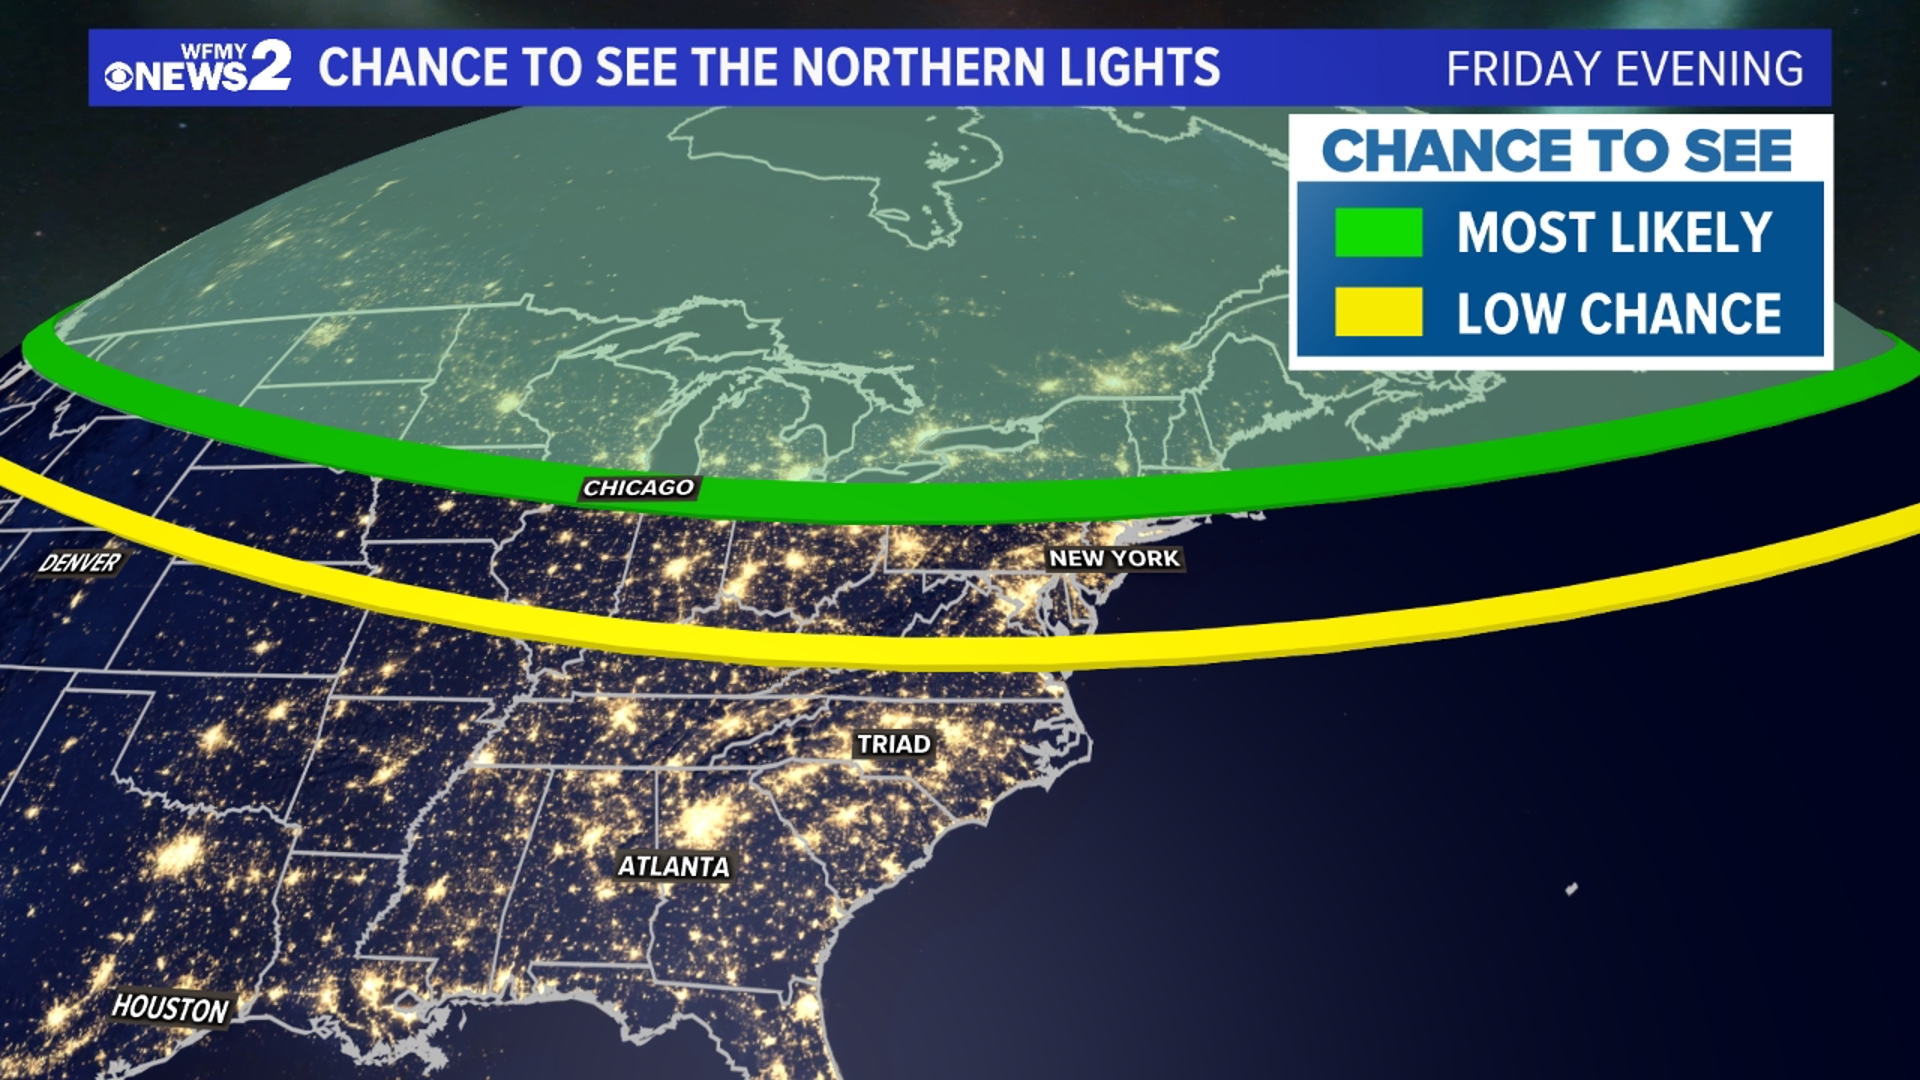 Can you see the northern lights in North Carolina on Sunday?